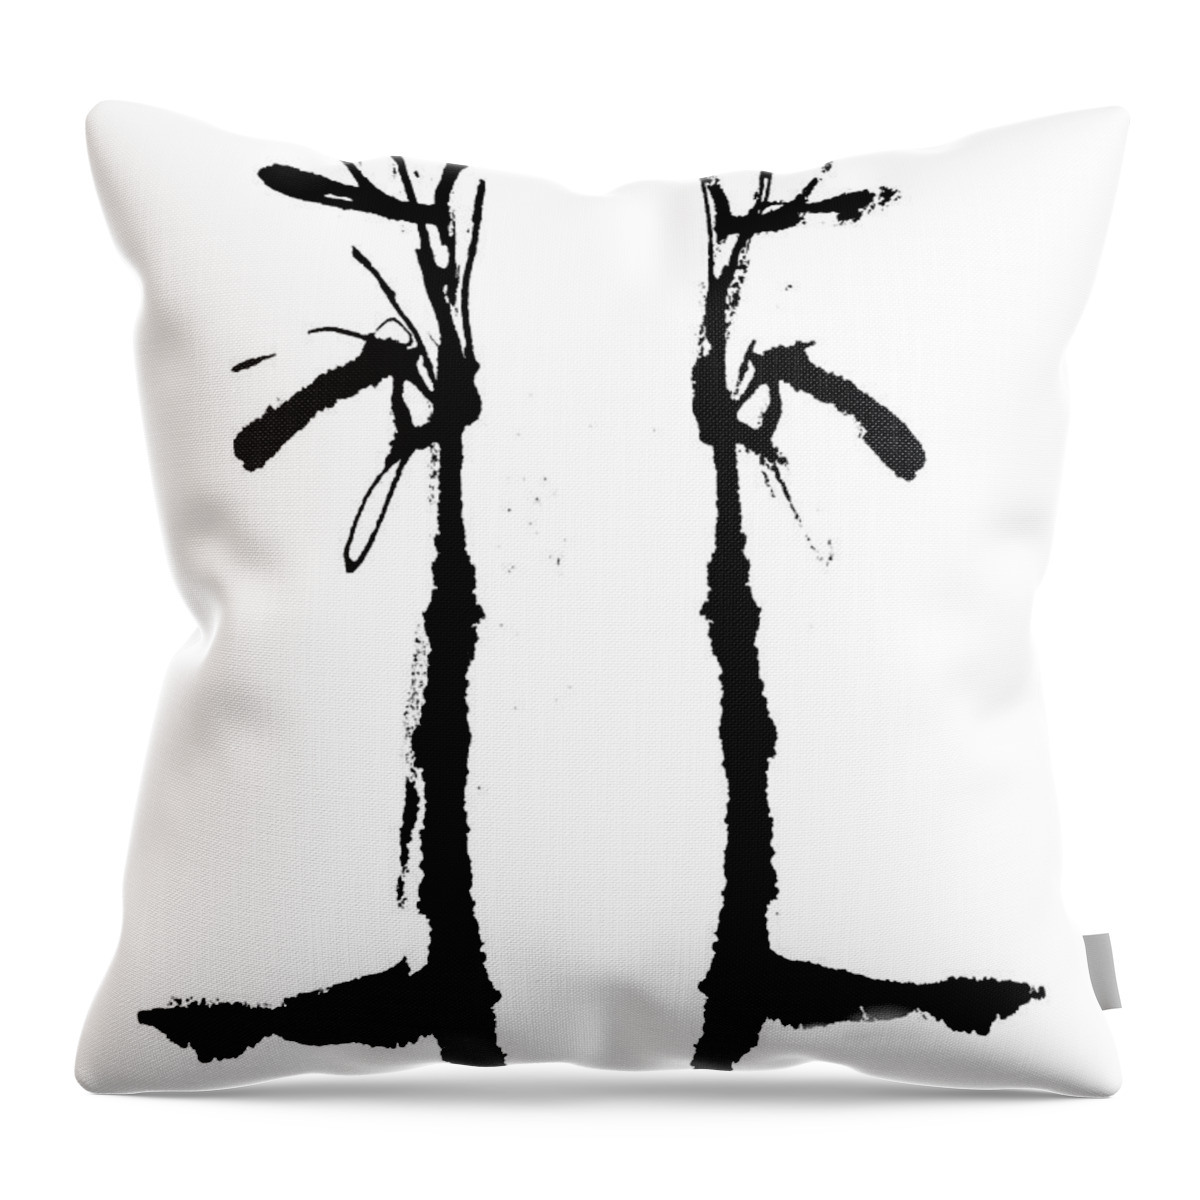 Abstract Throw Pillow featuring the painting Twin Trees by Stephenie Zagorski